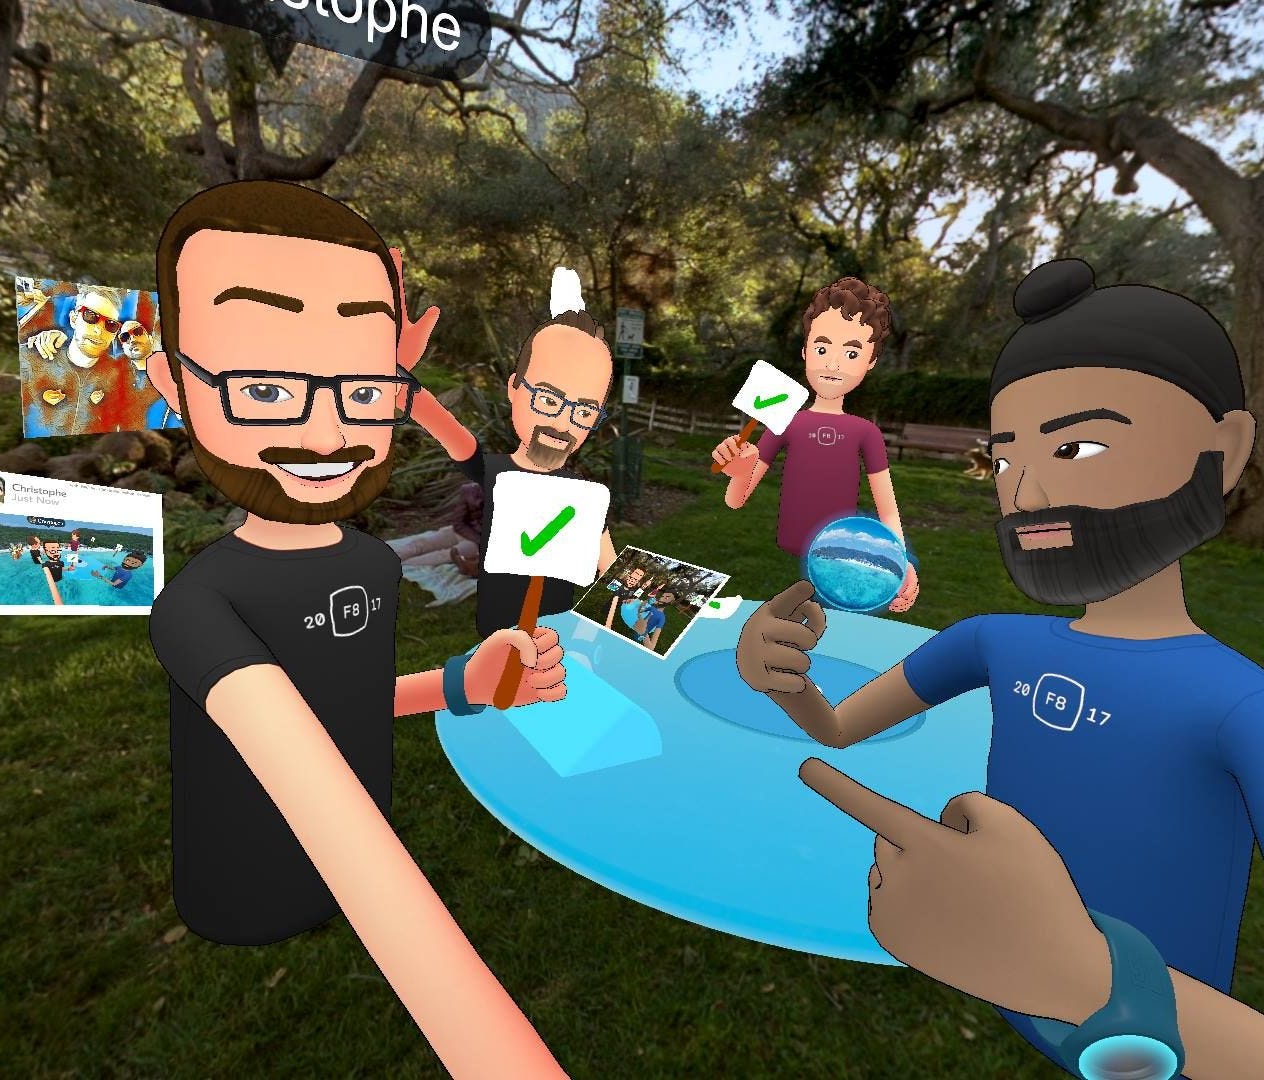 Facebook Spaces is a new social VR hang out area that allows owners of Oculus Rift and Touch to interact in virtual reality.